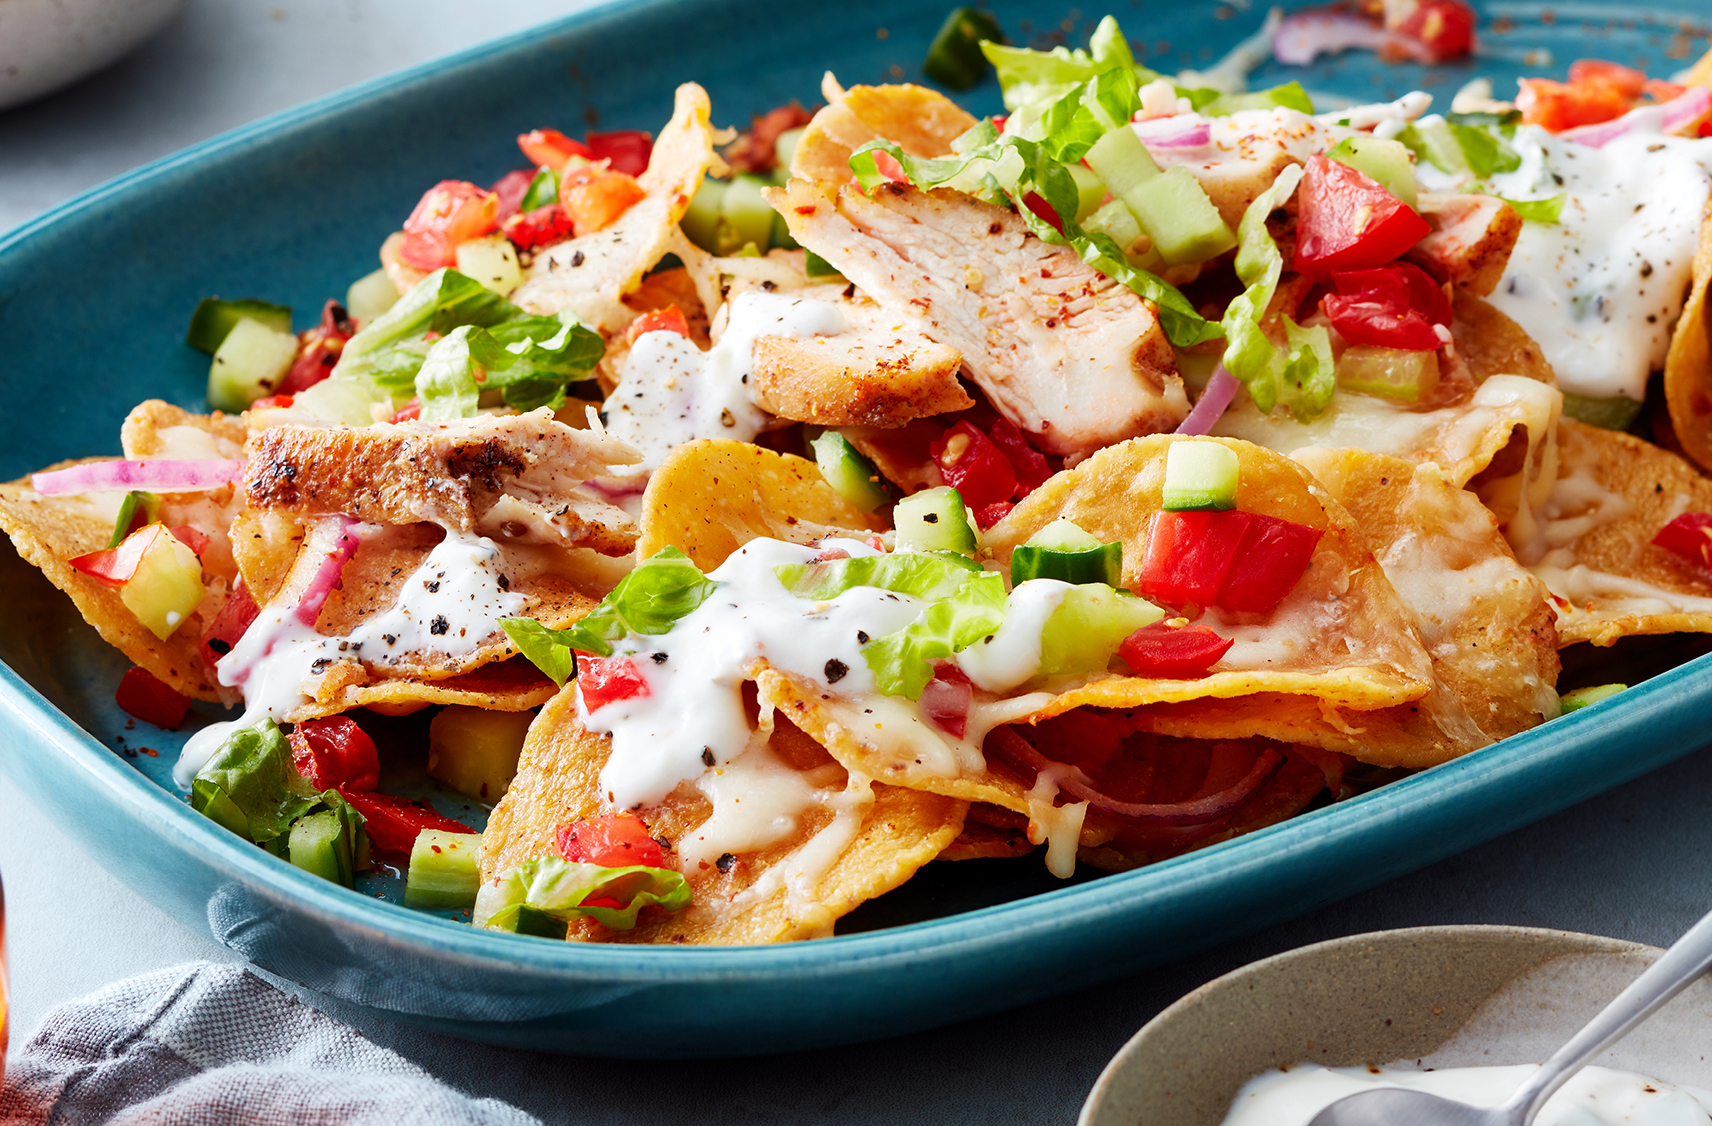 Seasoned chicken, diced veg, onion and a creamy drizzle top nacho chips